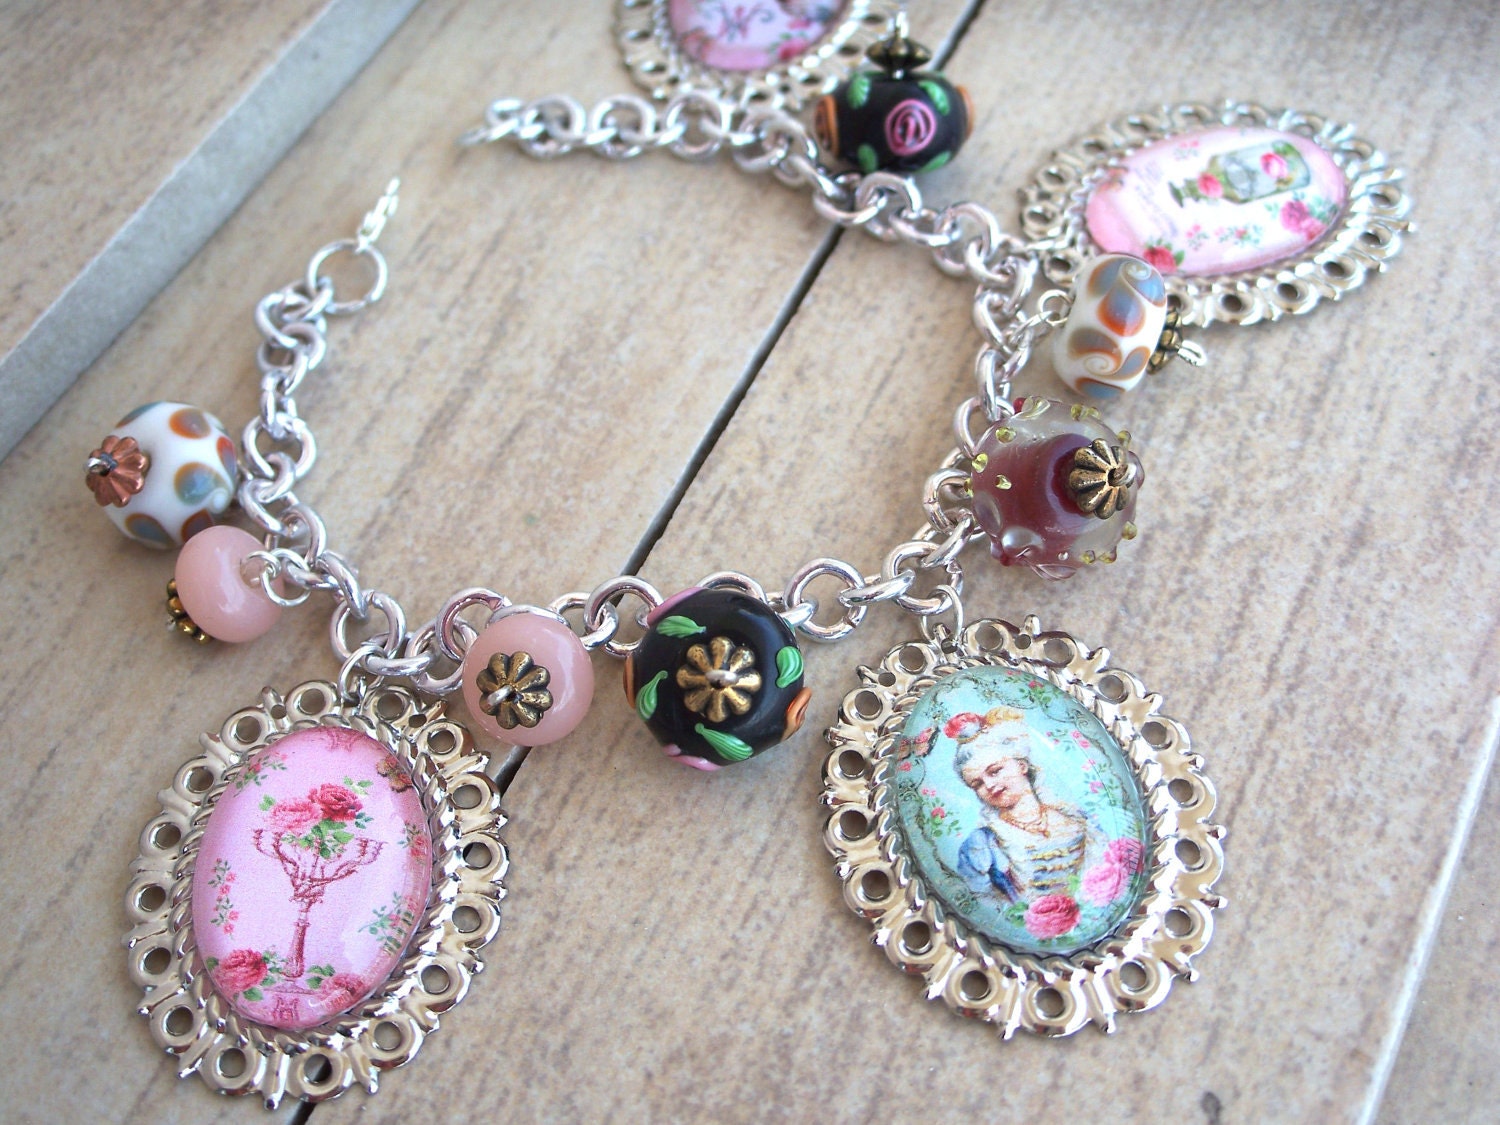 Marie Antoinette Of Our Heart-Impressive Photo Pendant Charm Bracelet-Available Only In My Shop